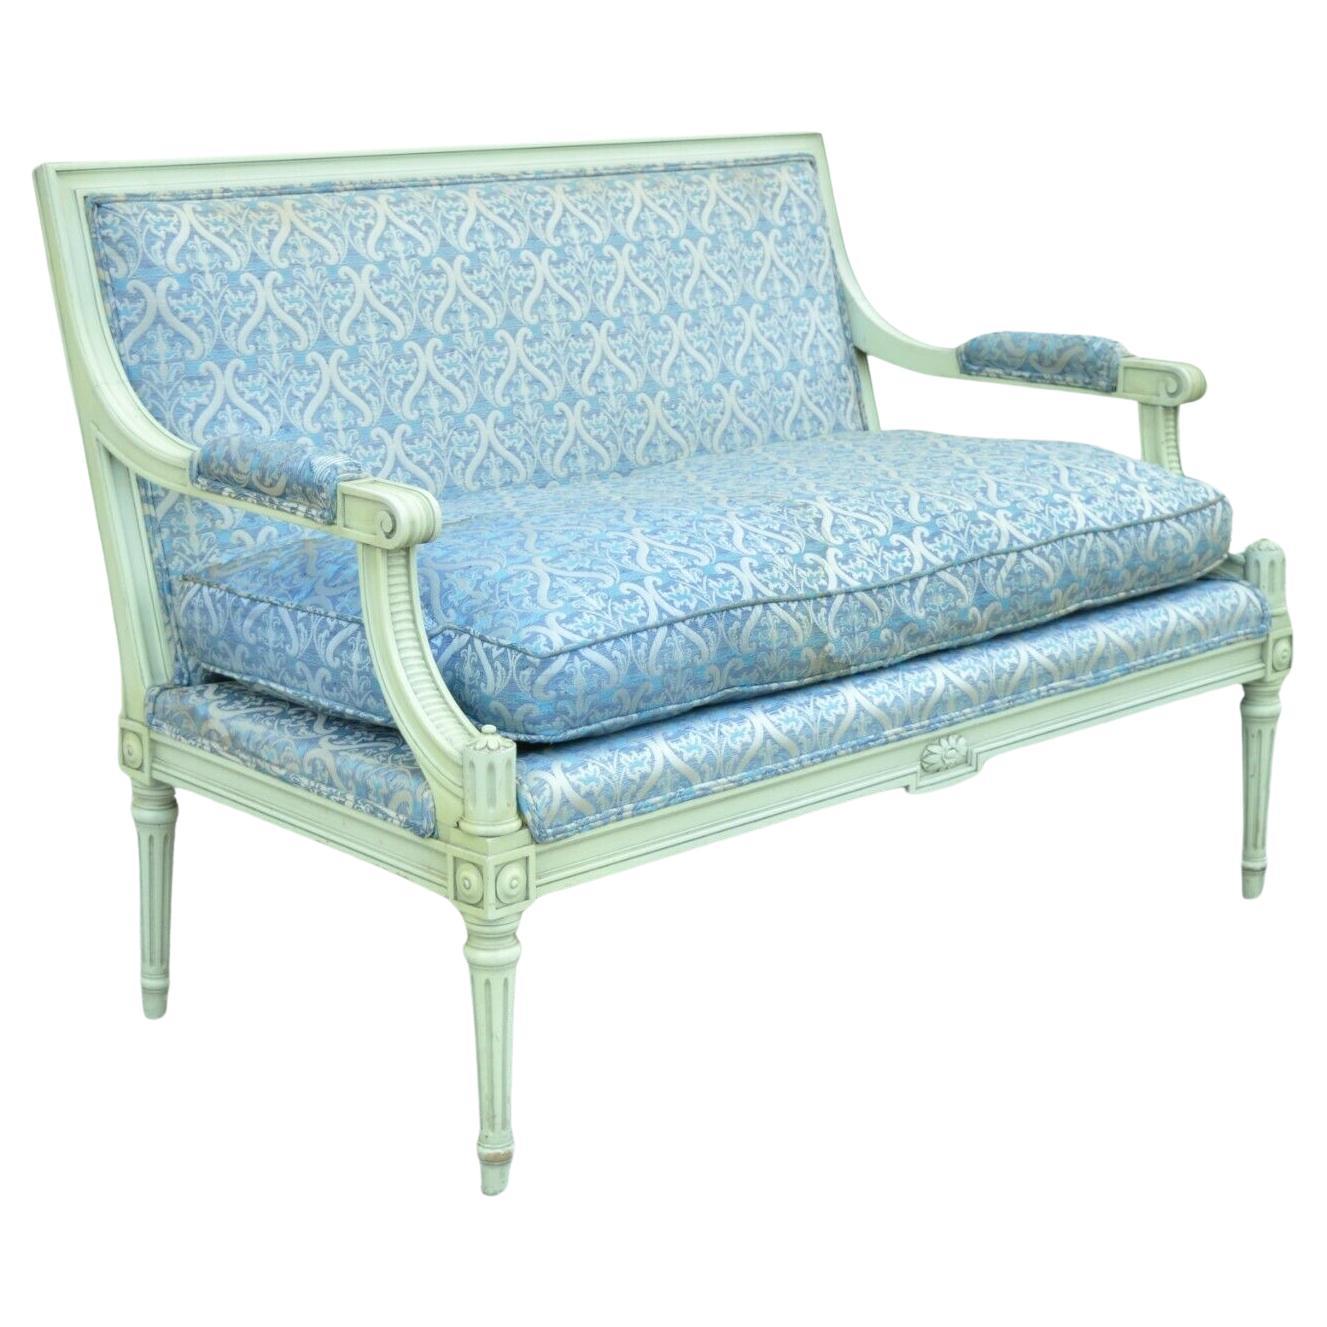 Vintage French Louis XVI Style Hollywood Regency Green Blue Settee Loveseat Sofa For Sale